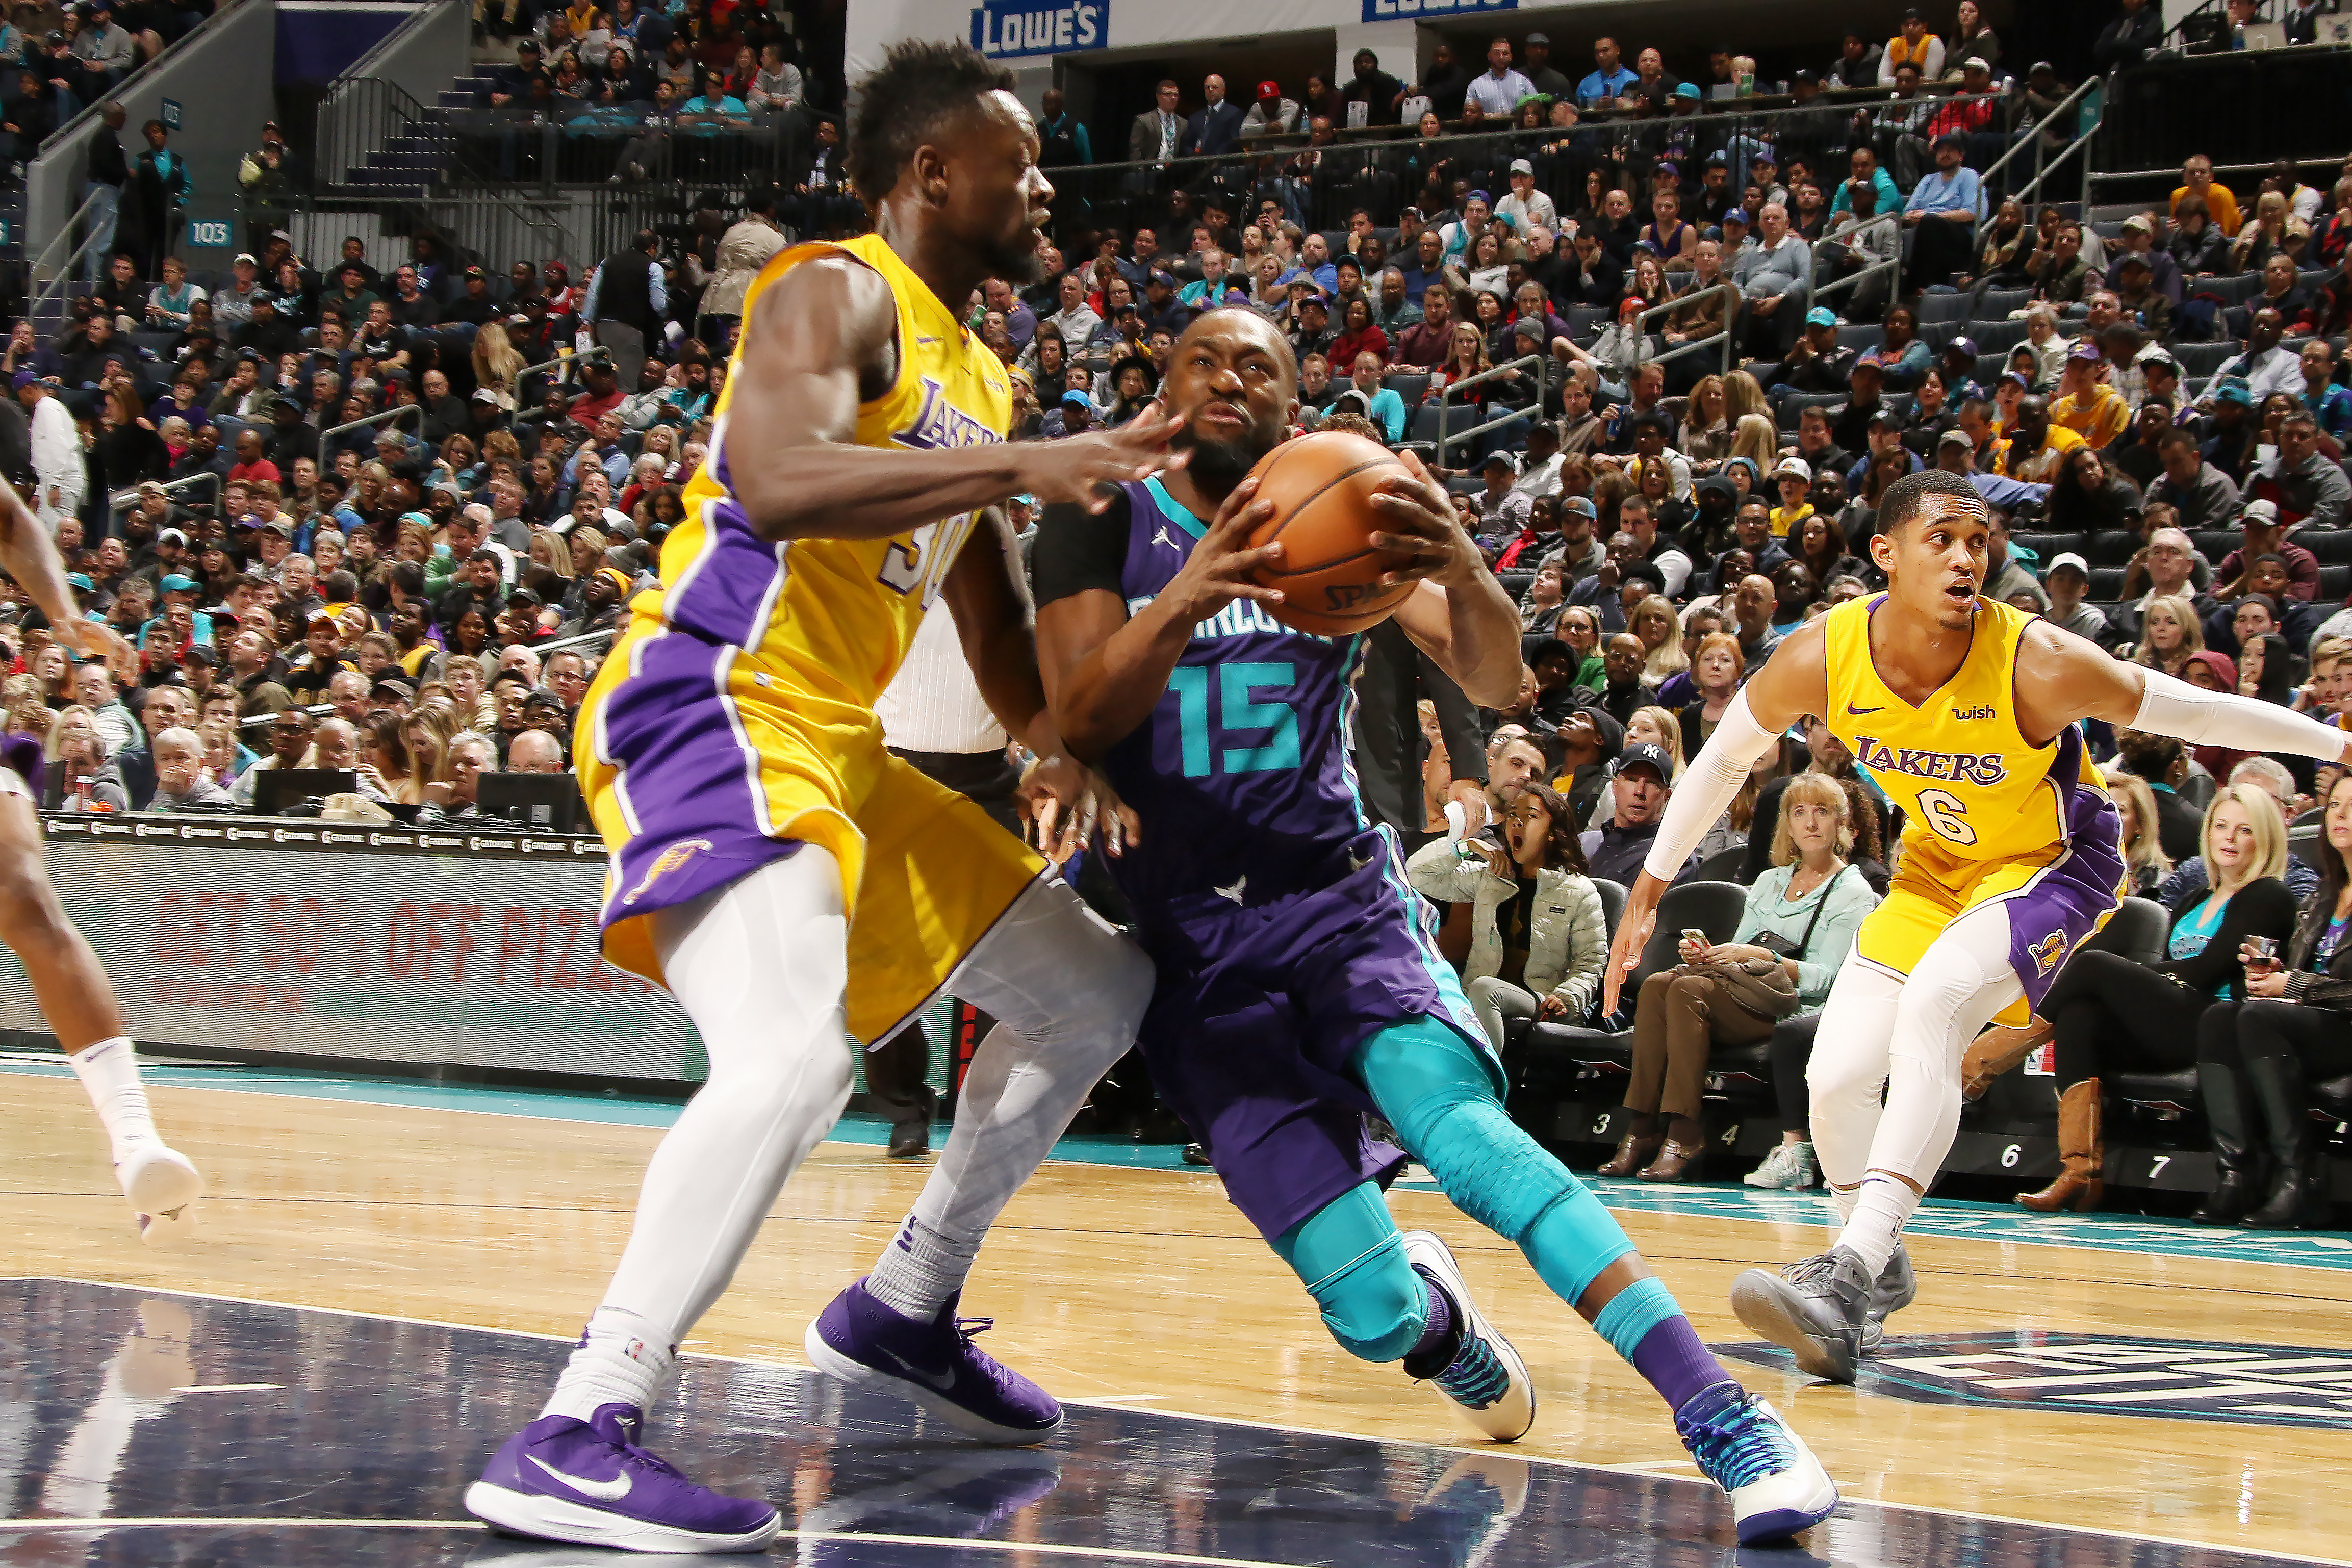 HORNETS at LAKERS, FULL GAME HIGHLIGHTS